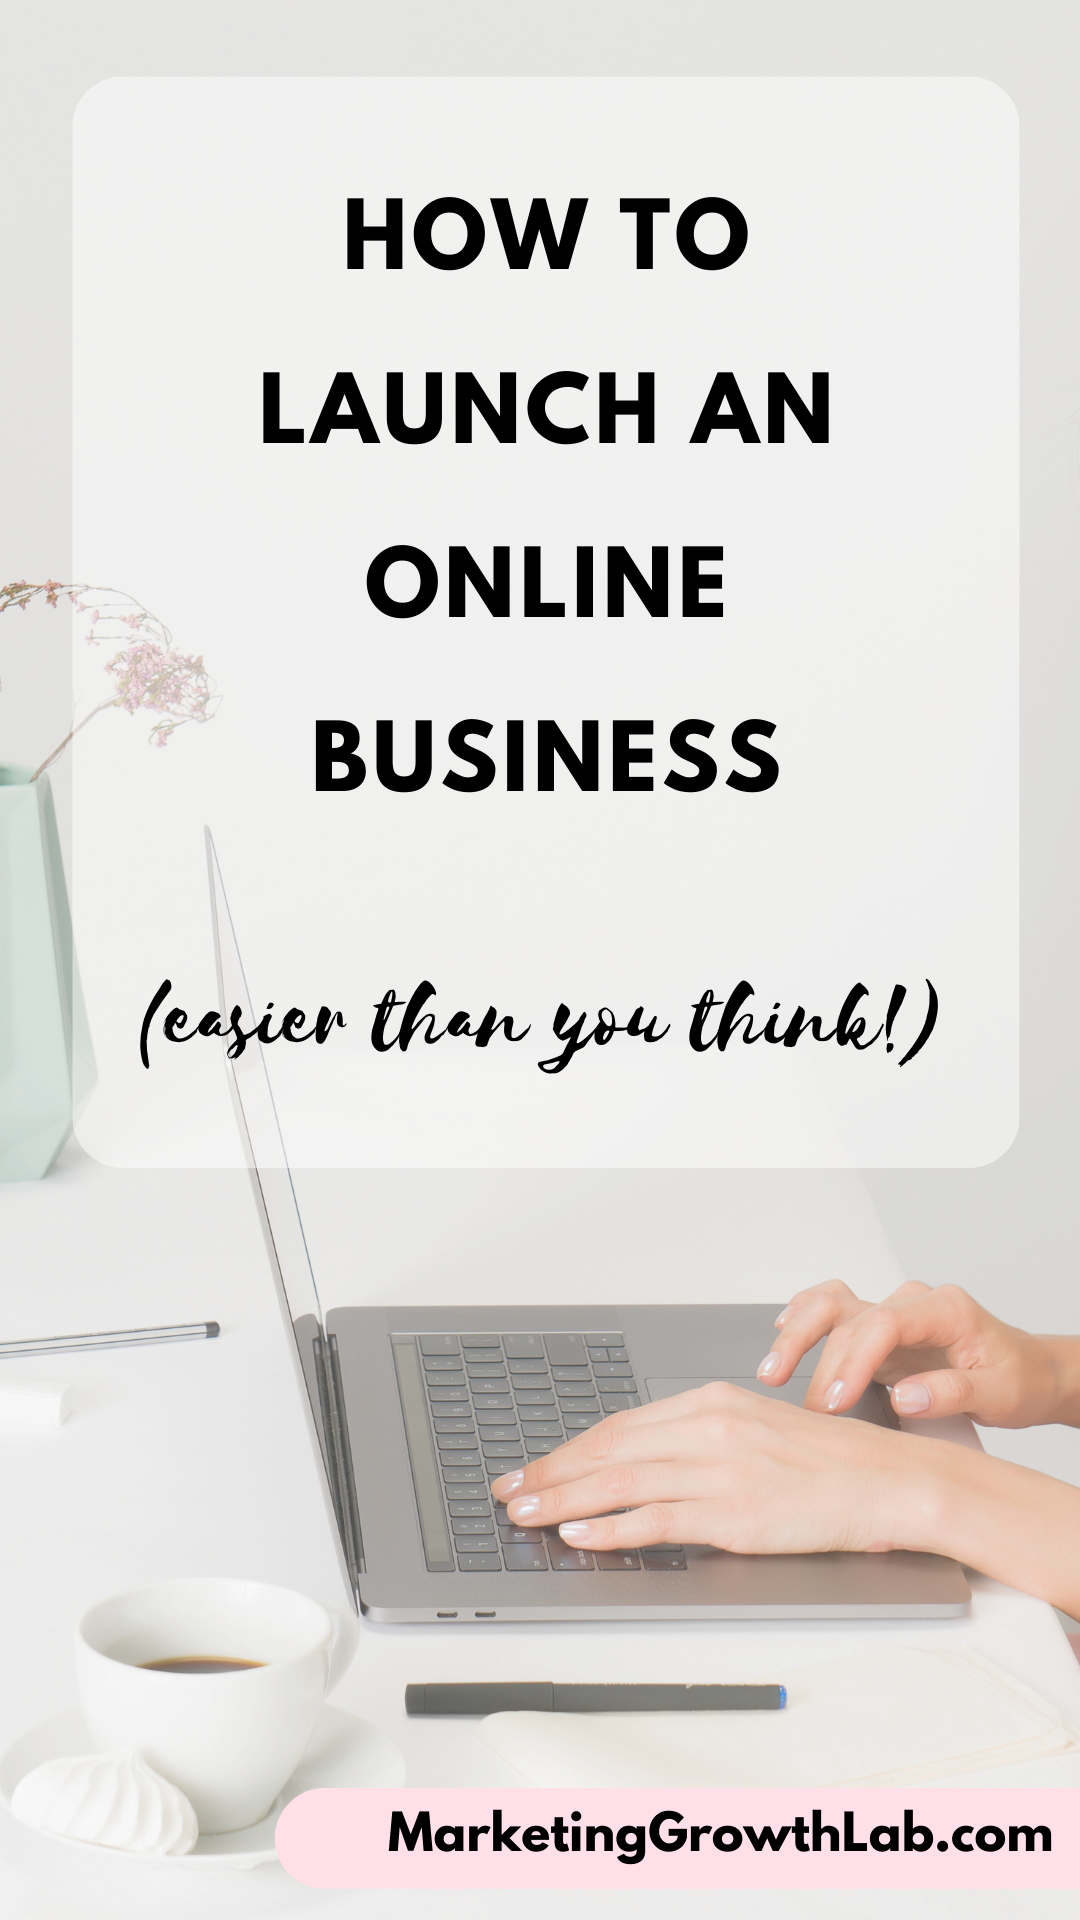 How to create an online business - the tools you need